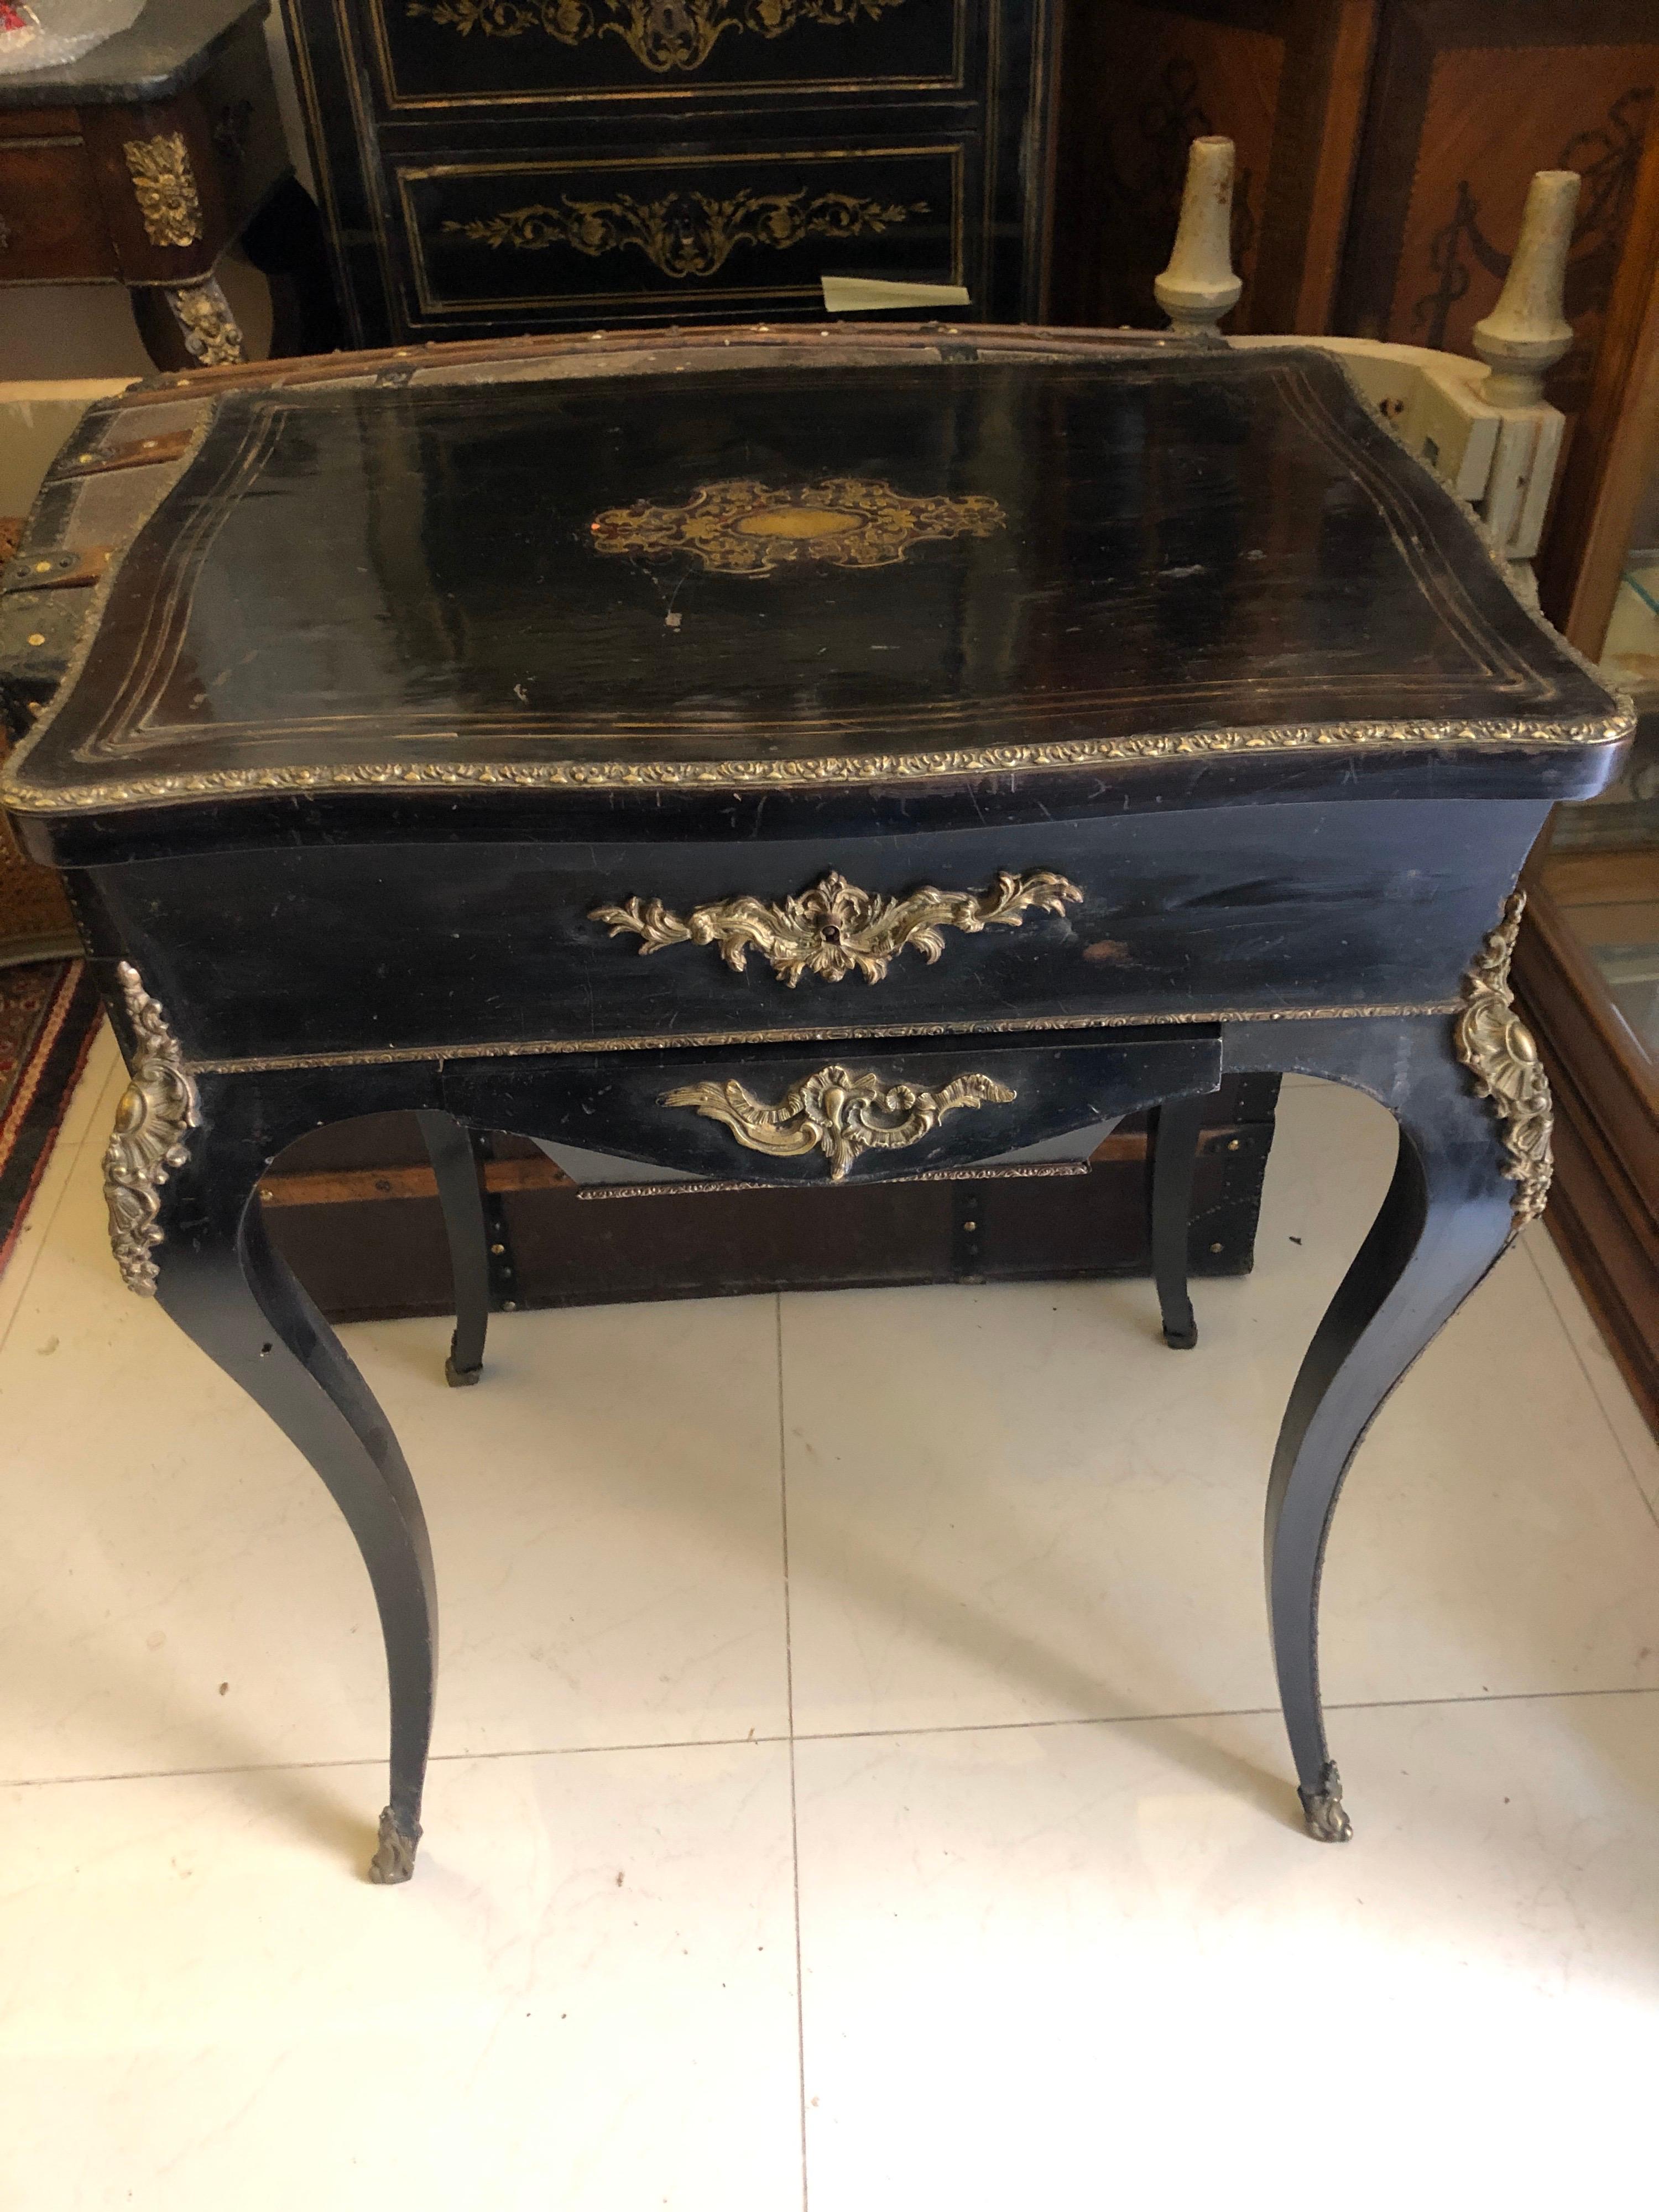 19th century work table in blackened wood inlaid with brass fillet, the lid reveals a tray with three compartments and a niche, it opens with a belt pocket. Curved legs, trim
brass and original mirror in very good condition. Very elegant piece